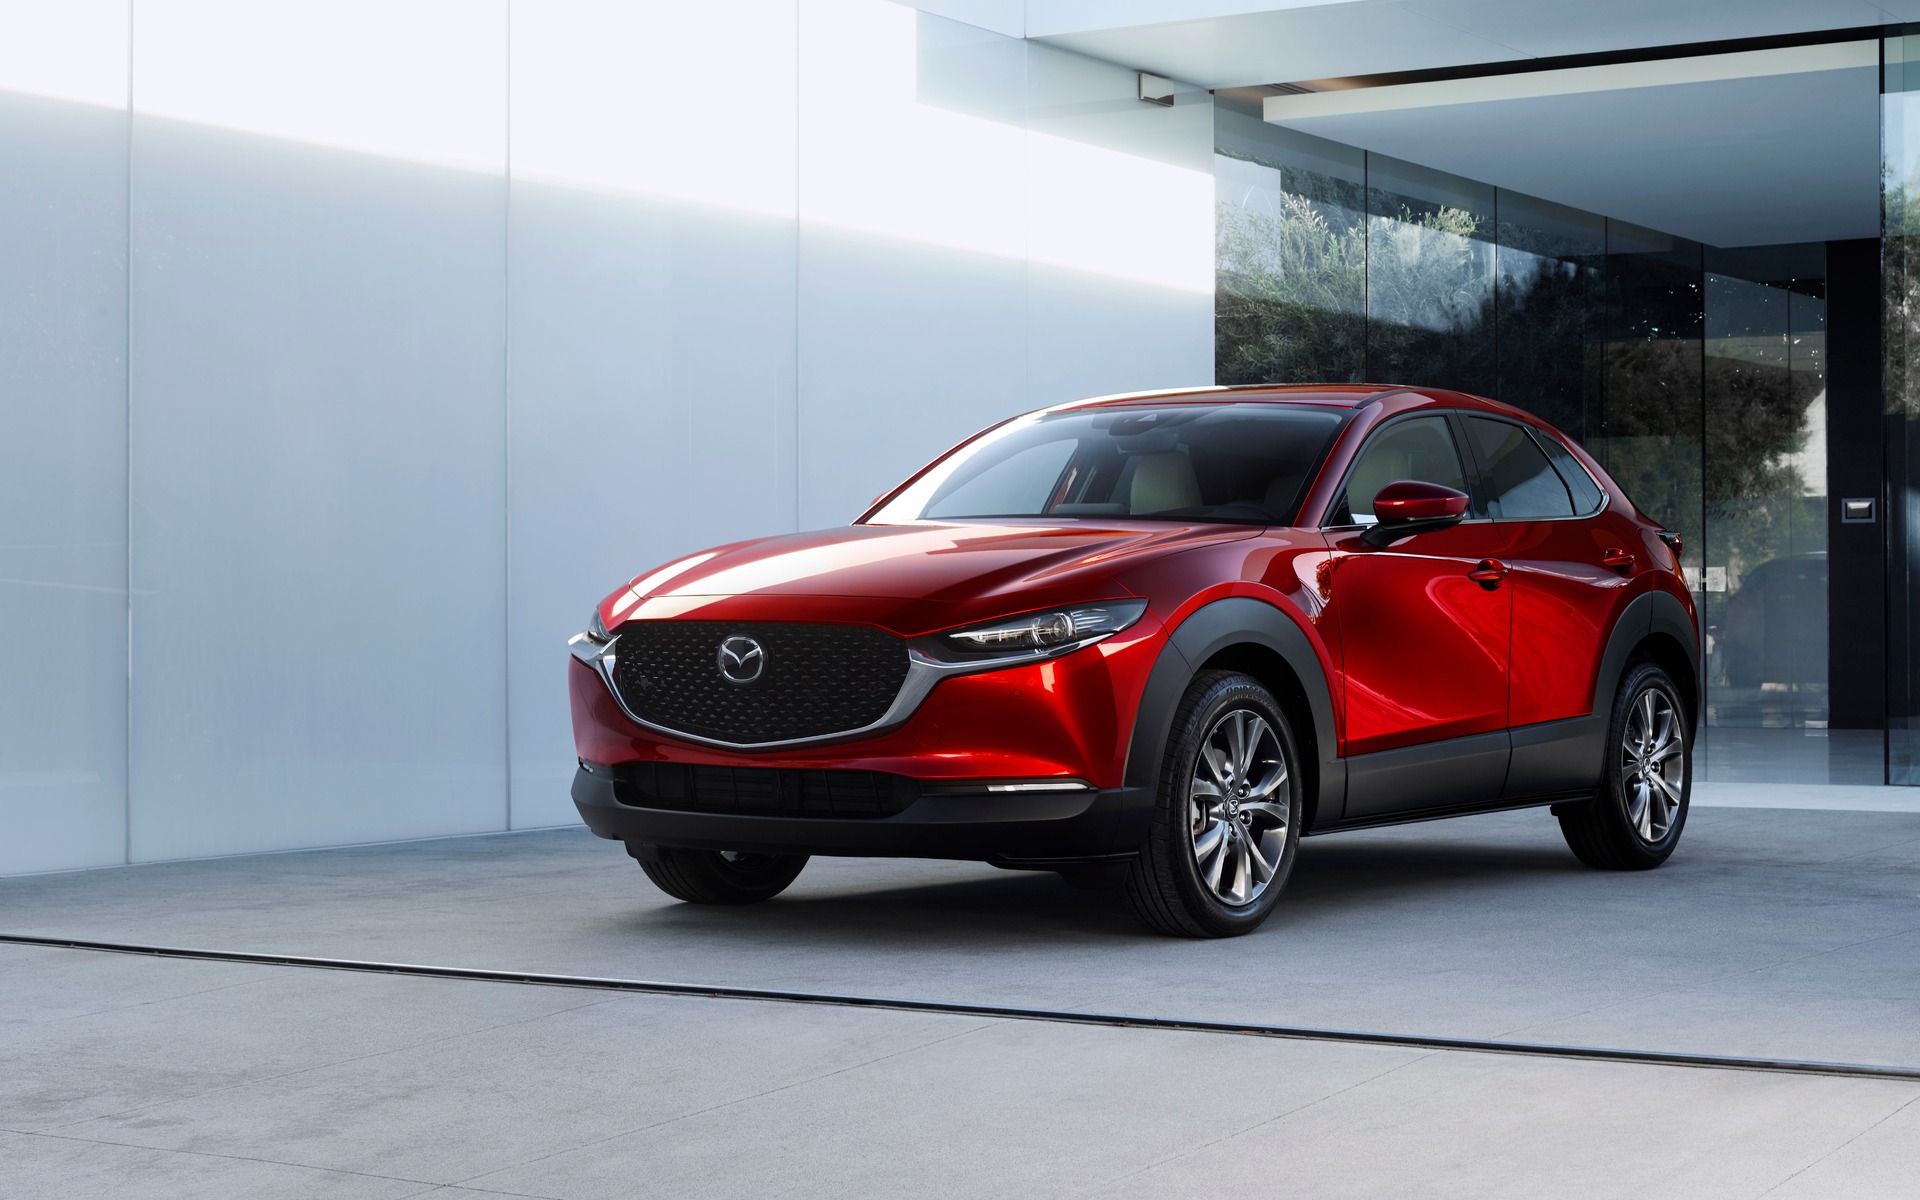 Image of a red 2020 Mazda CX-30 parked in front of a white house.